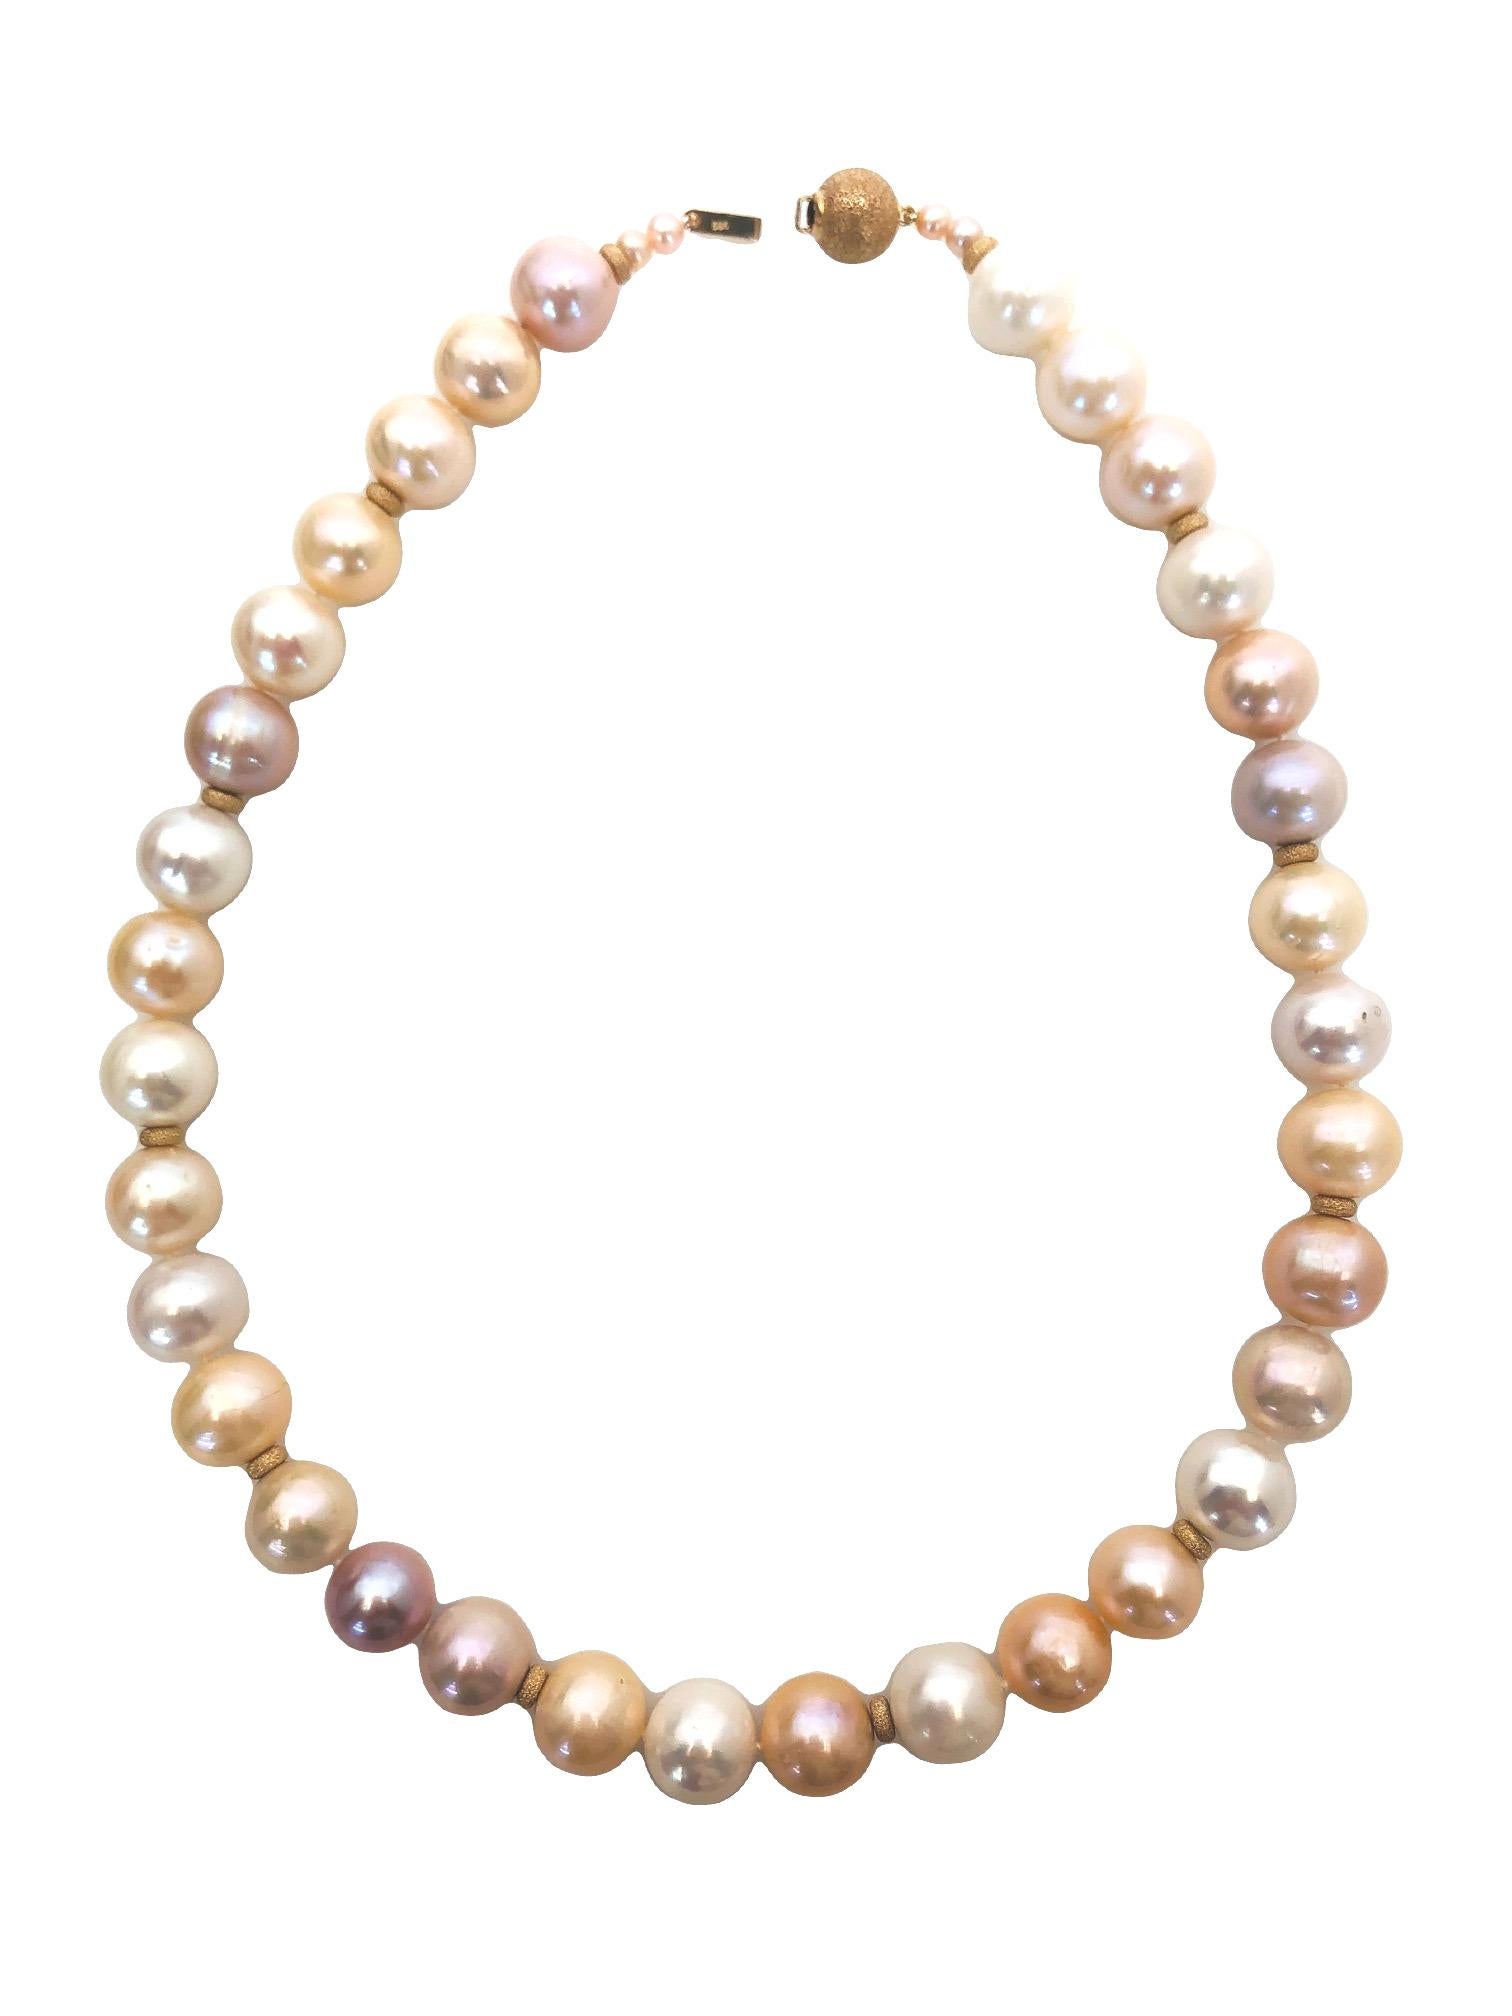 12-13mm Peach Freshwater Pearl Necklace with 14k Yellow Gold Accents In New Condition For Sale In Los Angeles, CA